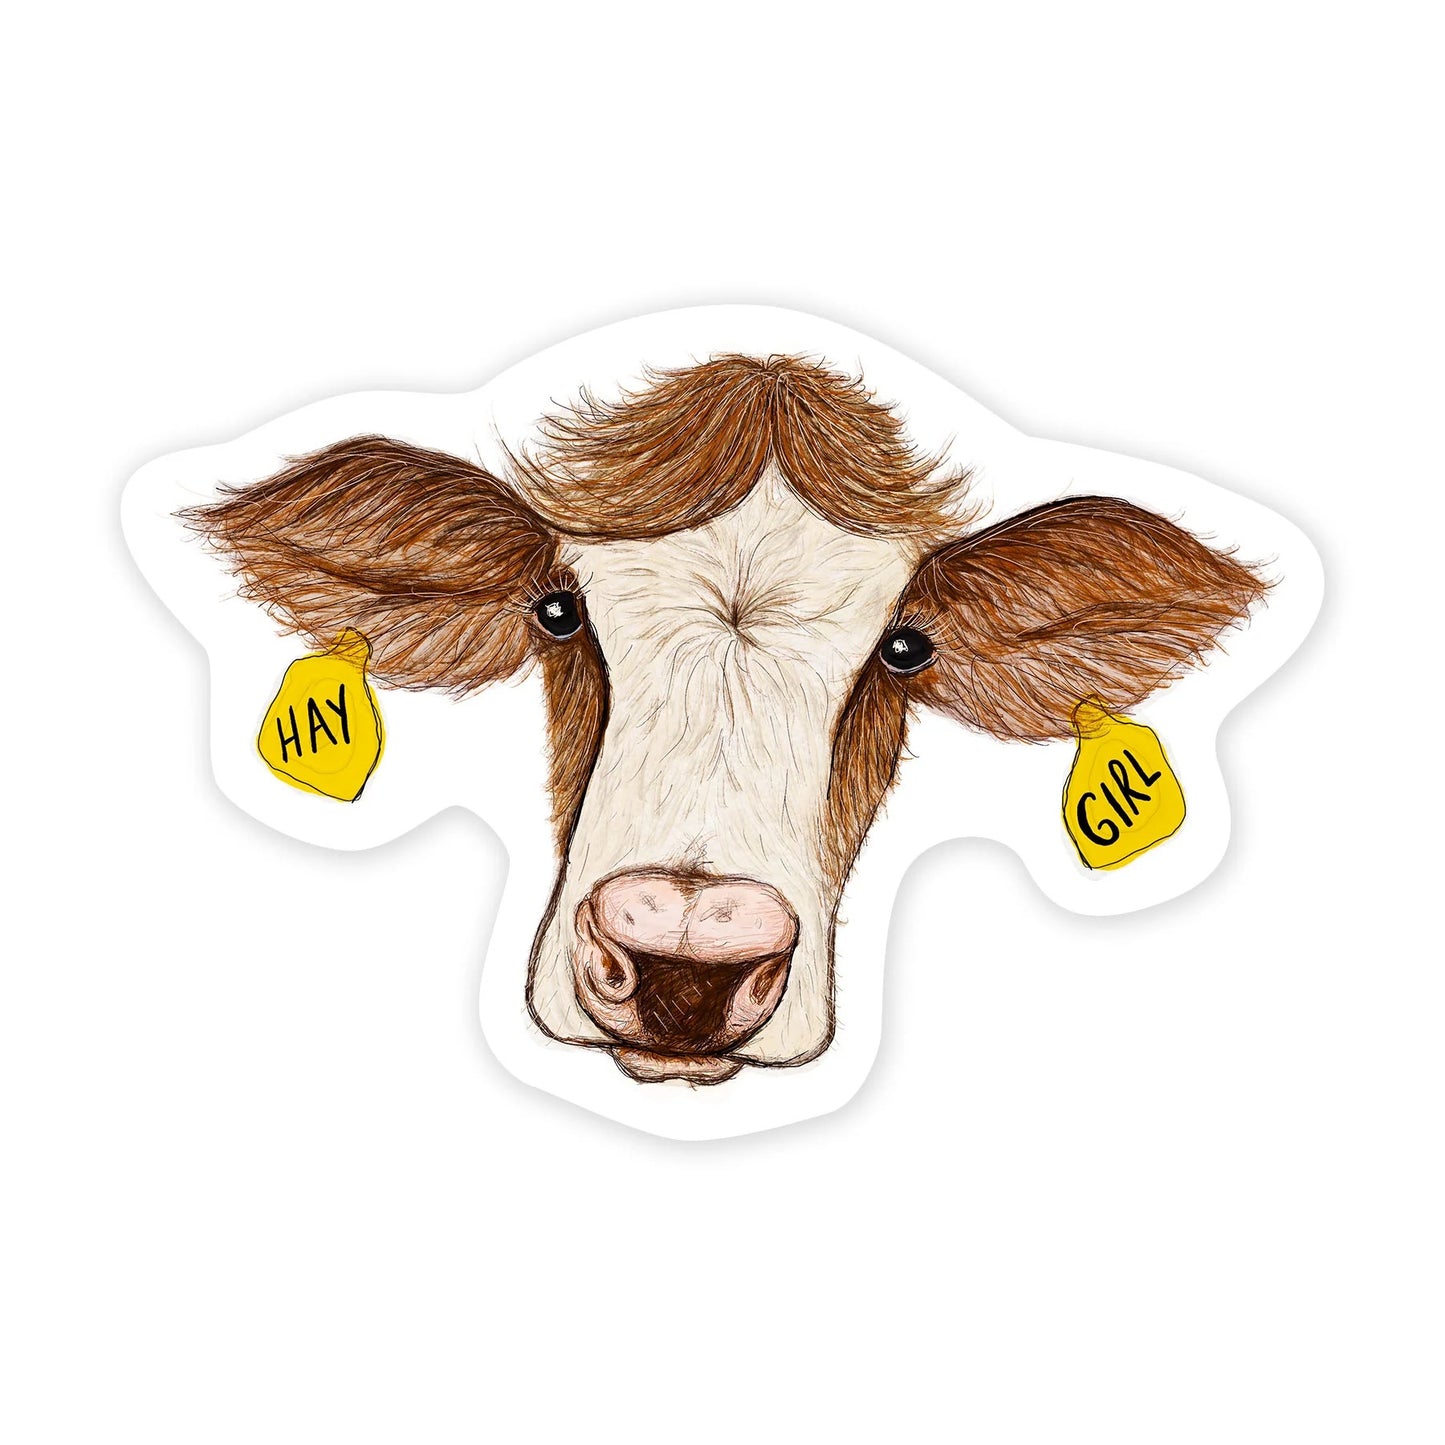 Hand drawn picture of a white and brown cow with earrings that say Hay Girl.